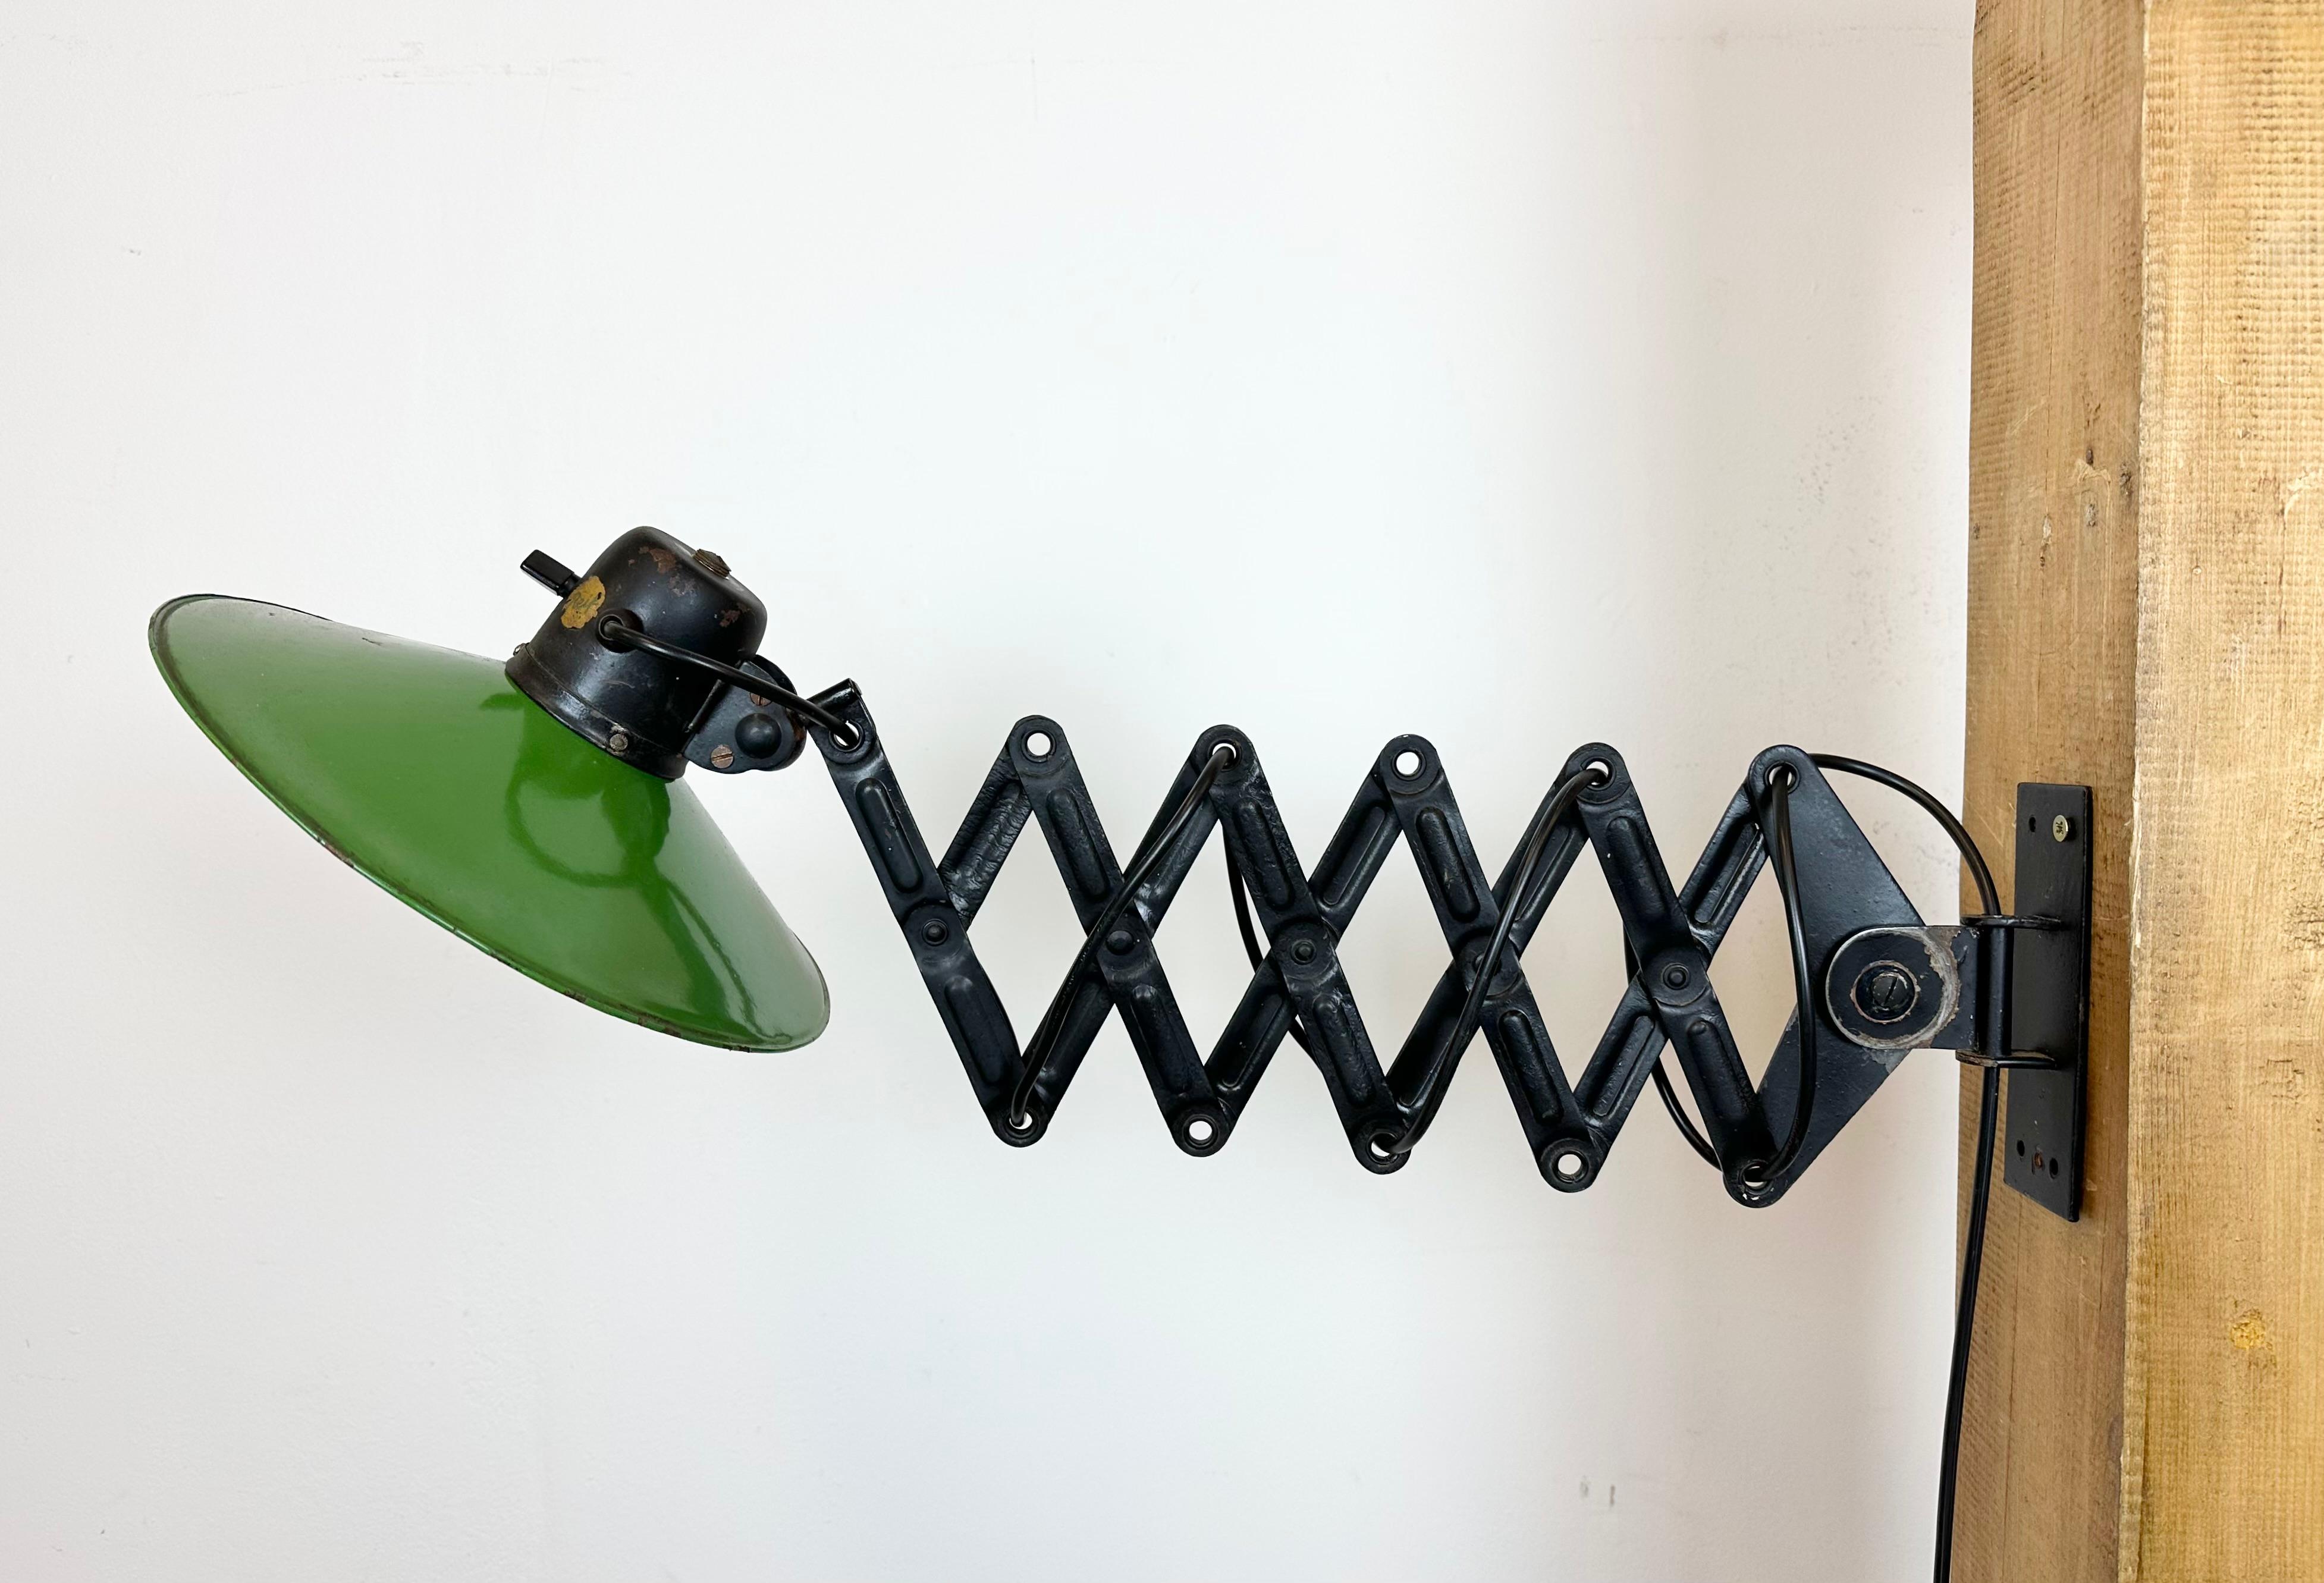 This vintage industrial scissor lamp was produced by REIF DRESDEN in Germany during the 1930s. The lamp has a green enamel shade with white enamel interior. Black iron scissor arm is extendable and can be turned sideways. The original socket with